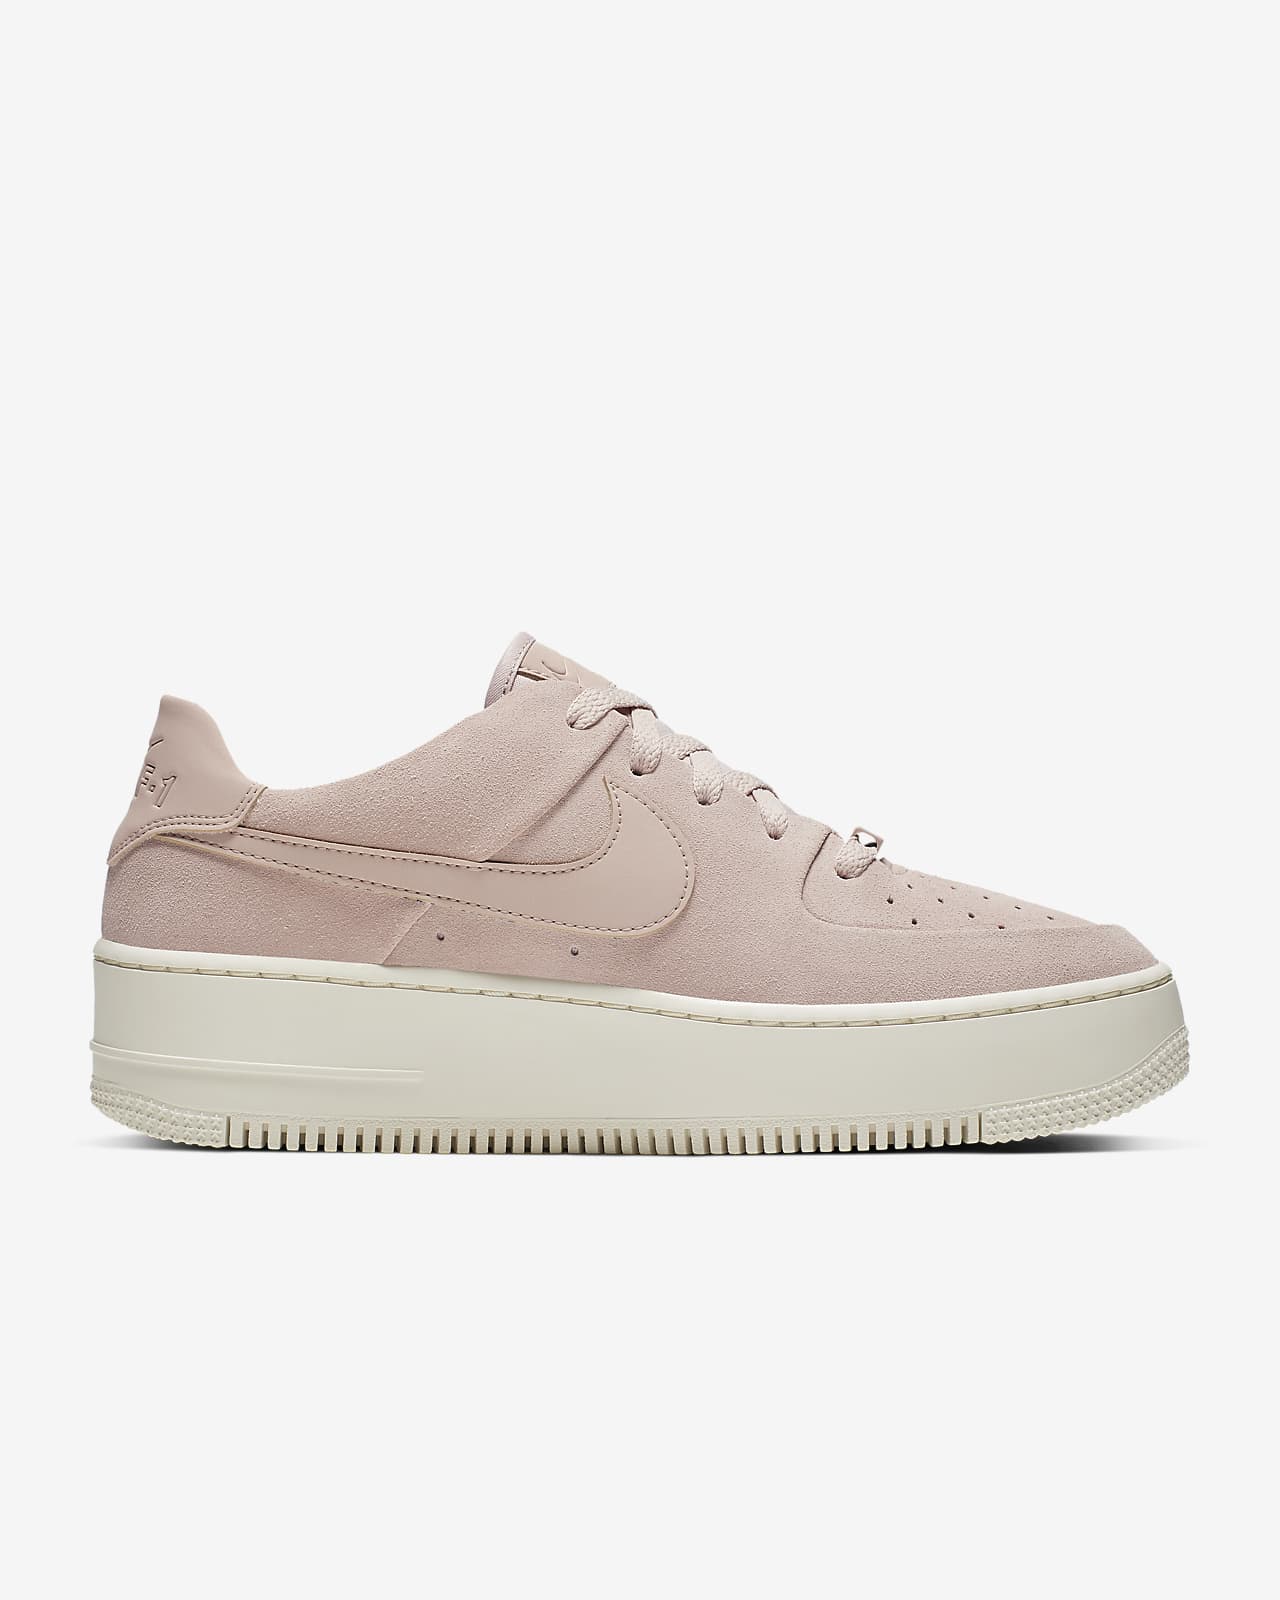 nike women's air force 1 sage low trainer